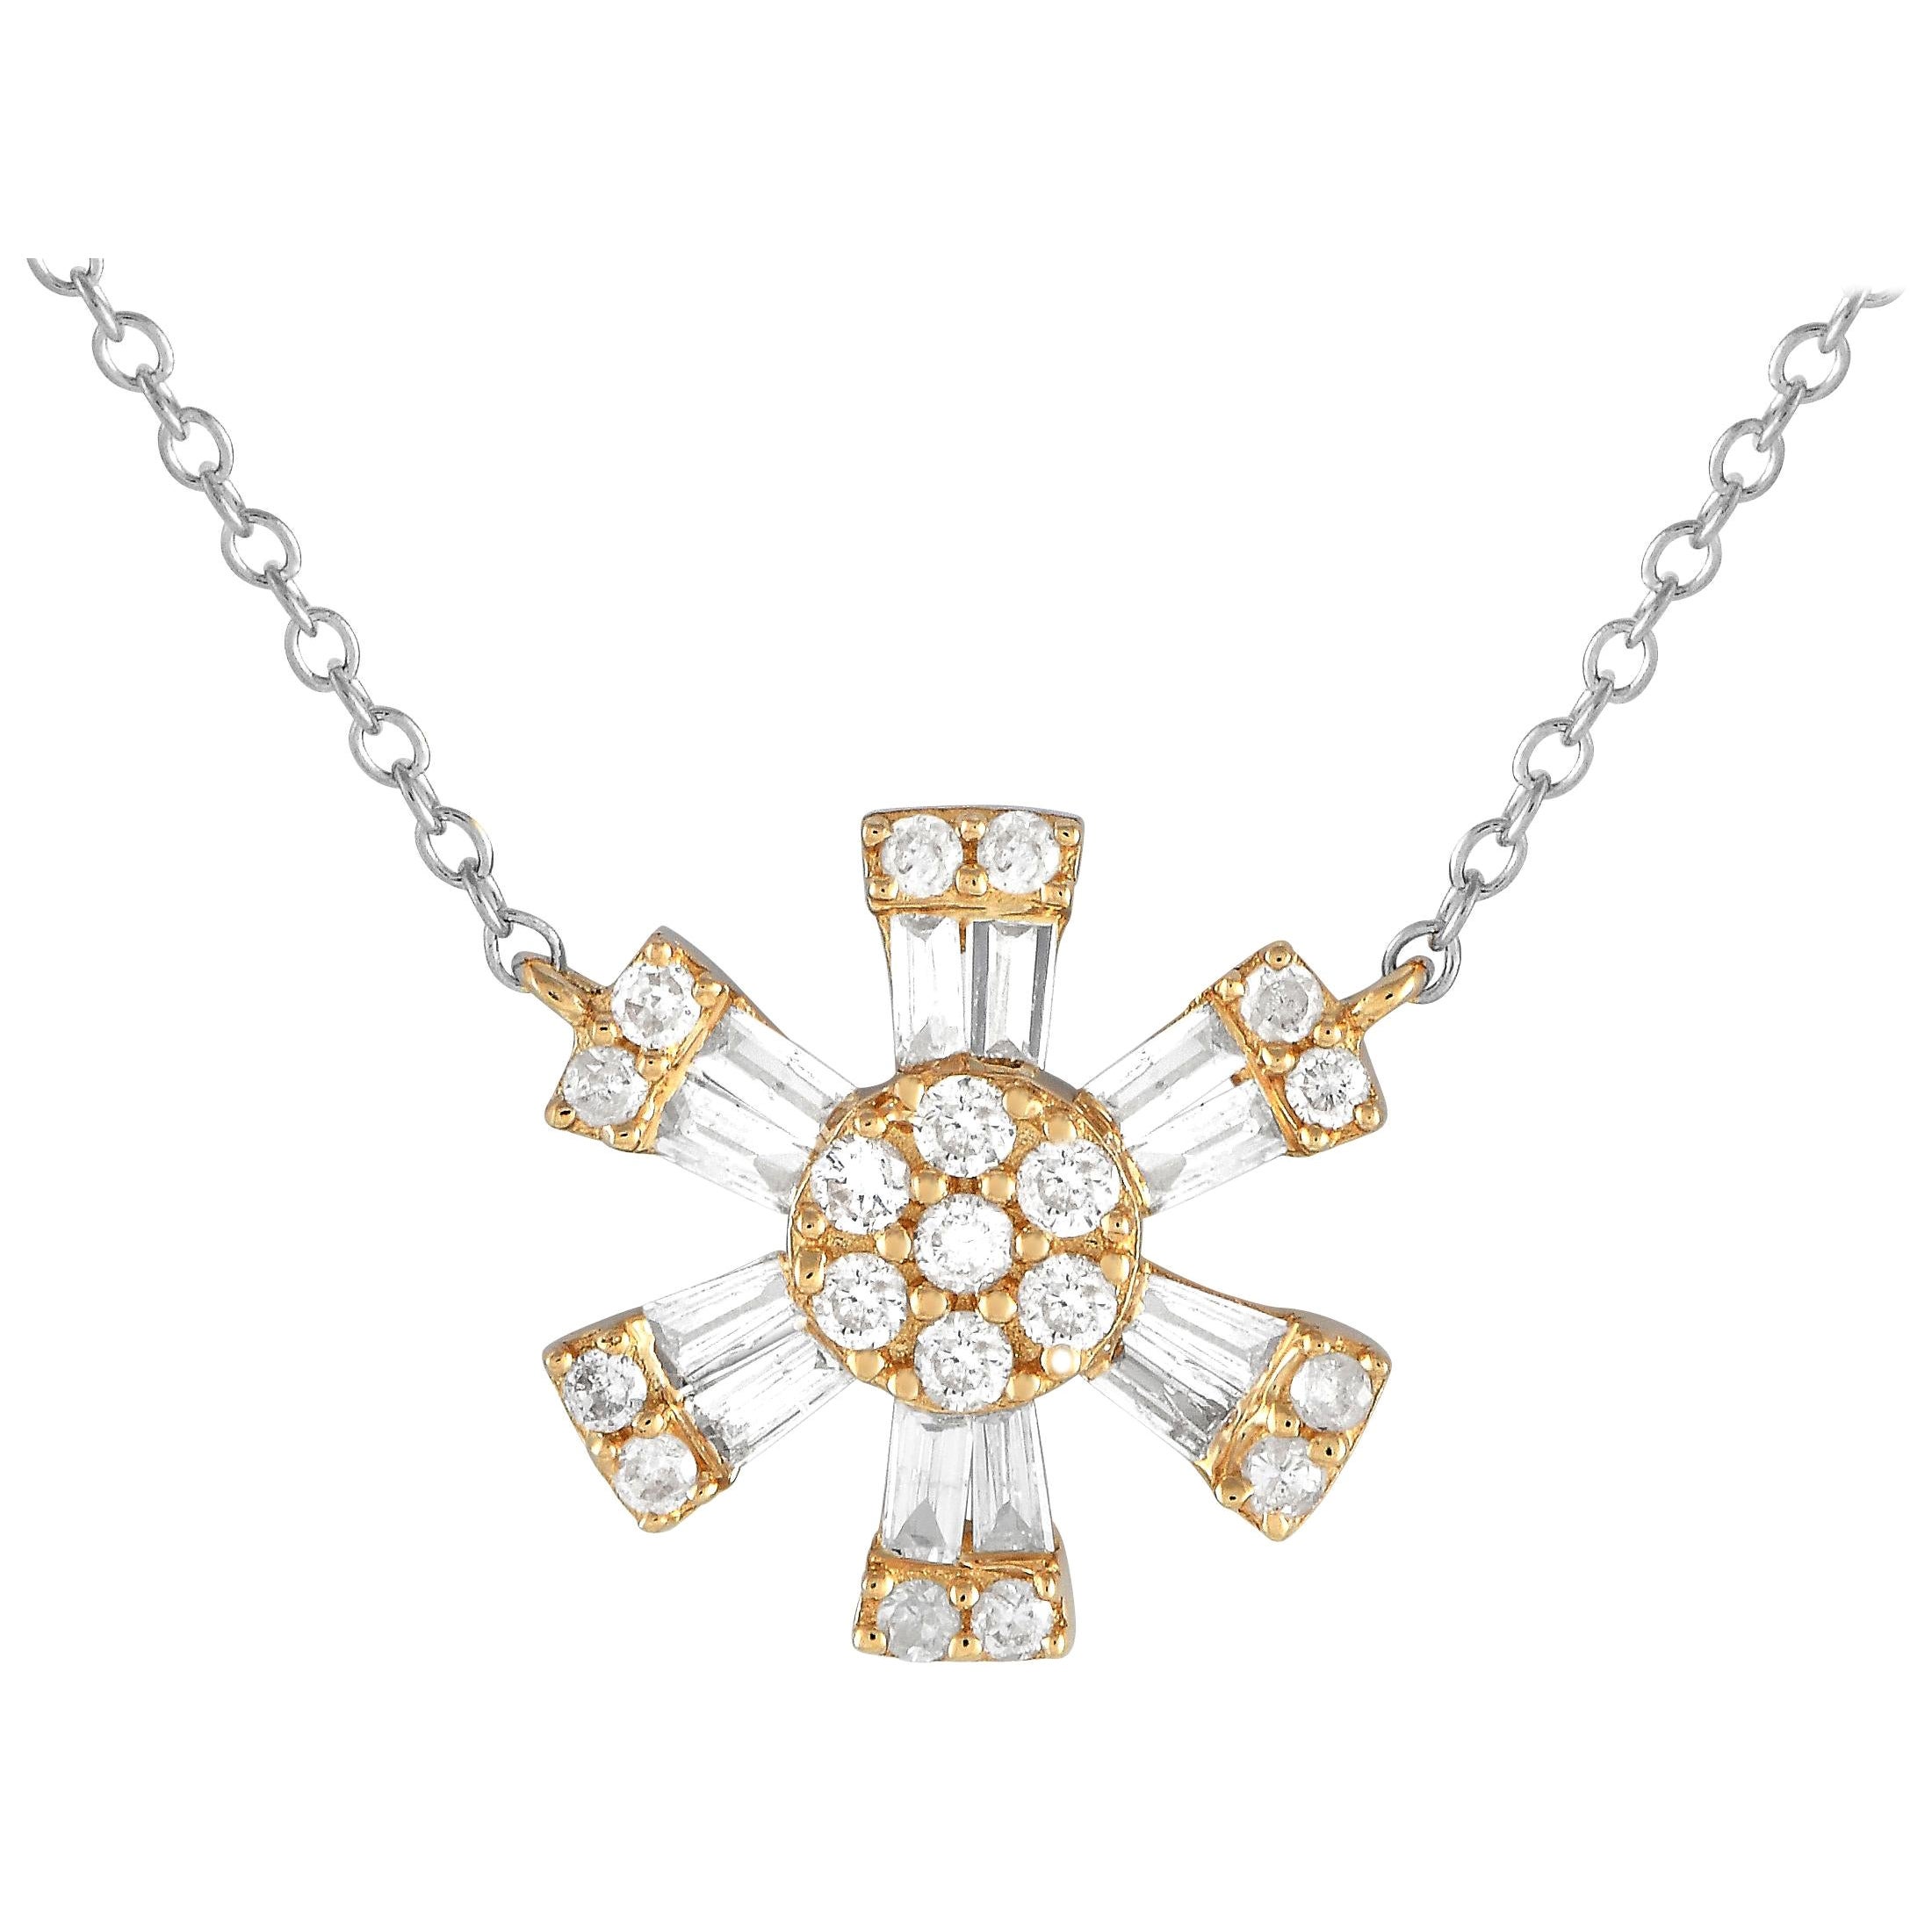 LB Exclusive 14K White and Yellow Gold 0.25ct Diamond Necklace